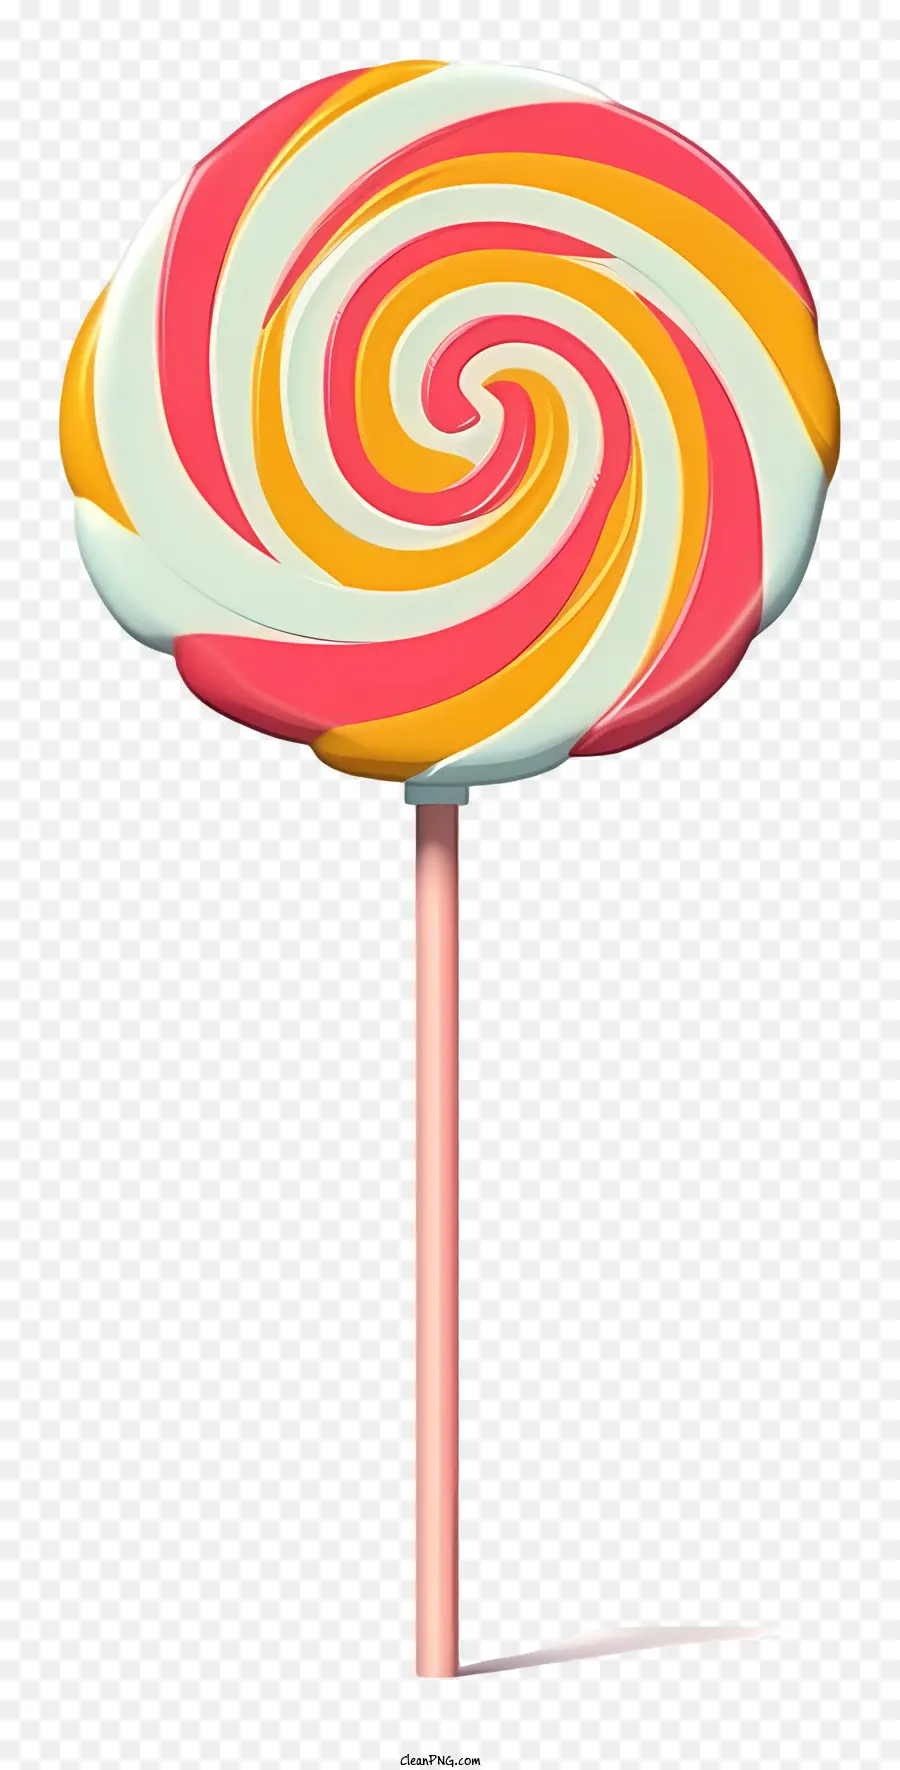 candy cane lollipop swirled design shiny and smooth pink stick square base